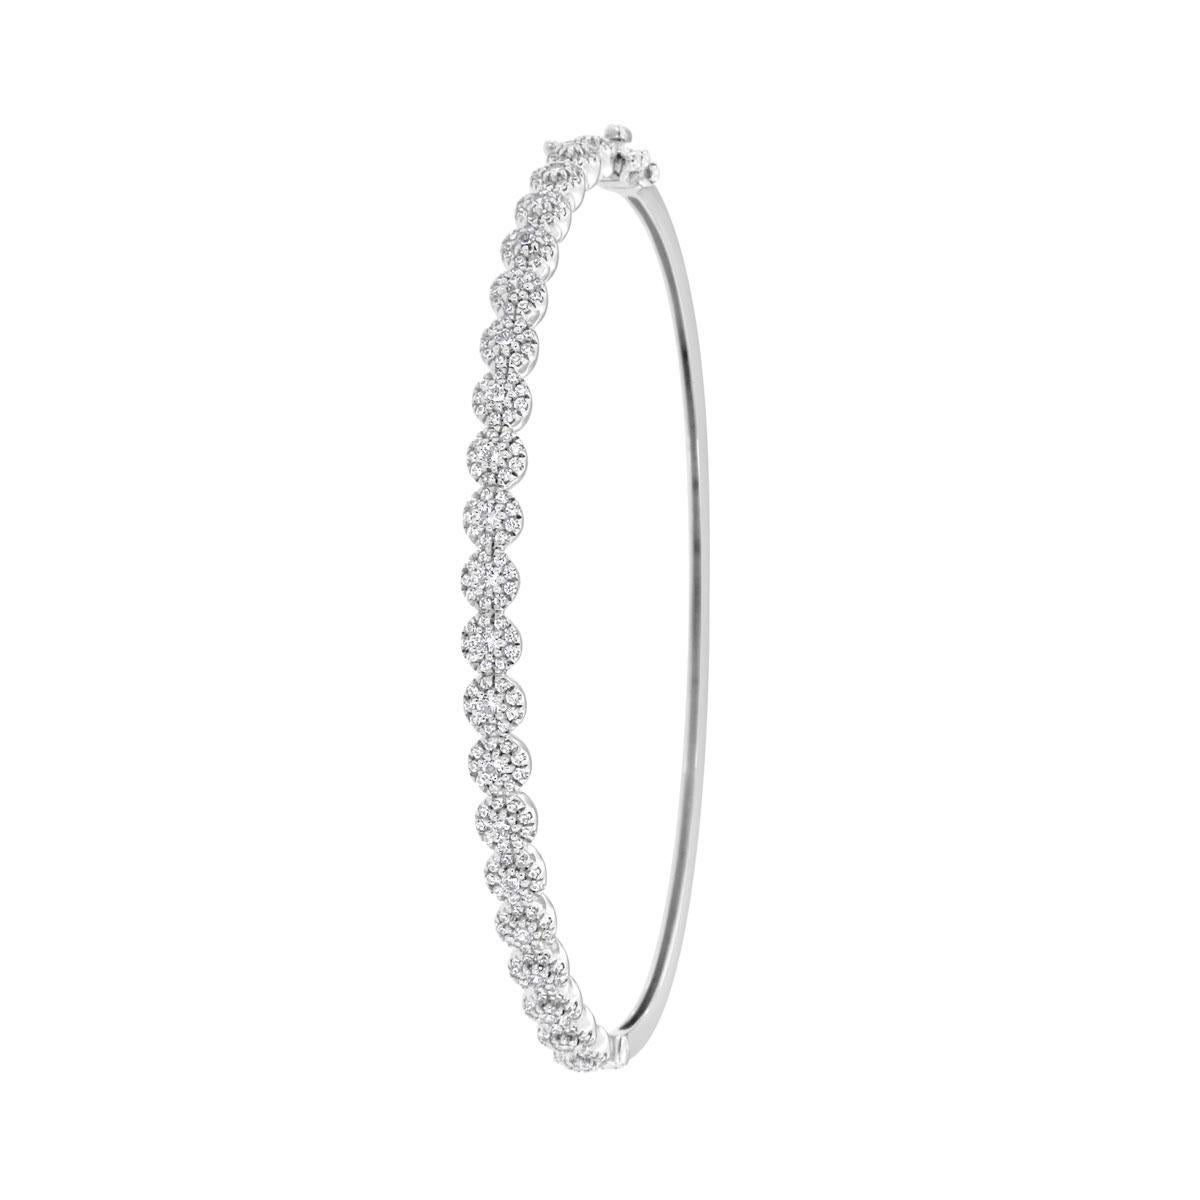 This petite halo bangle features round brilliant diamonds micro-prong-set for maximum brilliance. Experience the difference!

Product details: 

Center Gemstone Type: NATURAL DIAMOND
Center Gemstone Color: WHITE
Center Gemstone Shape: ROUND
Center